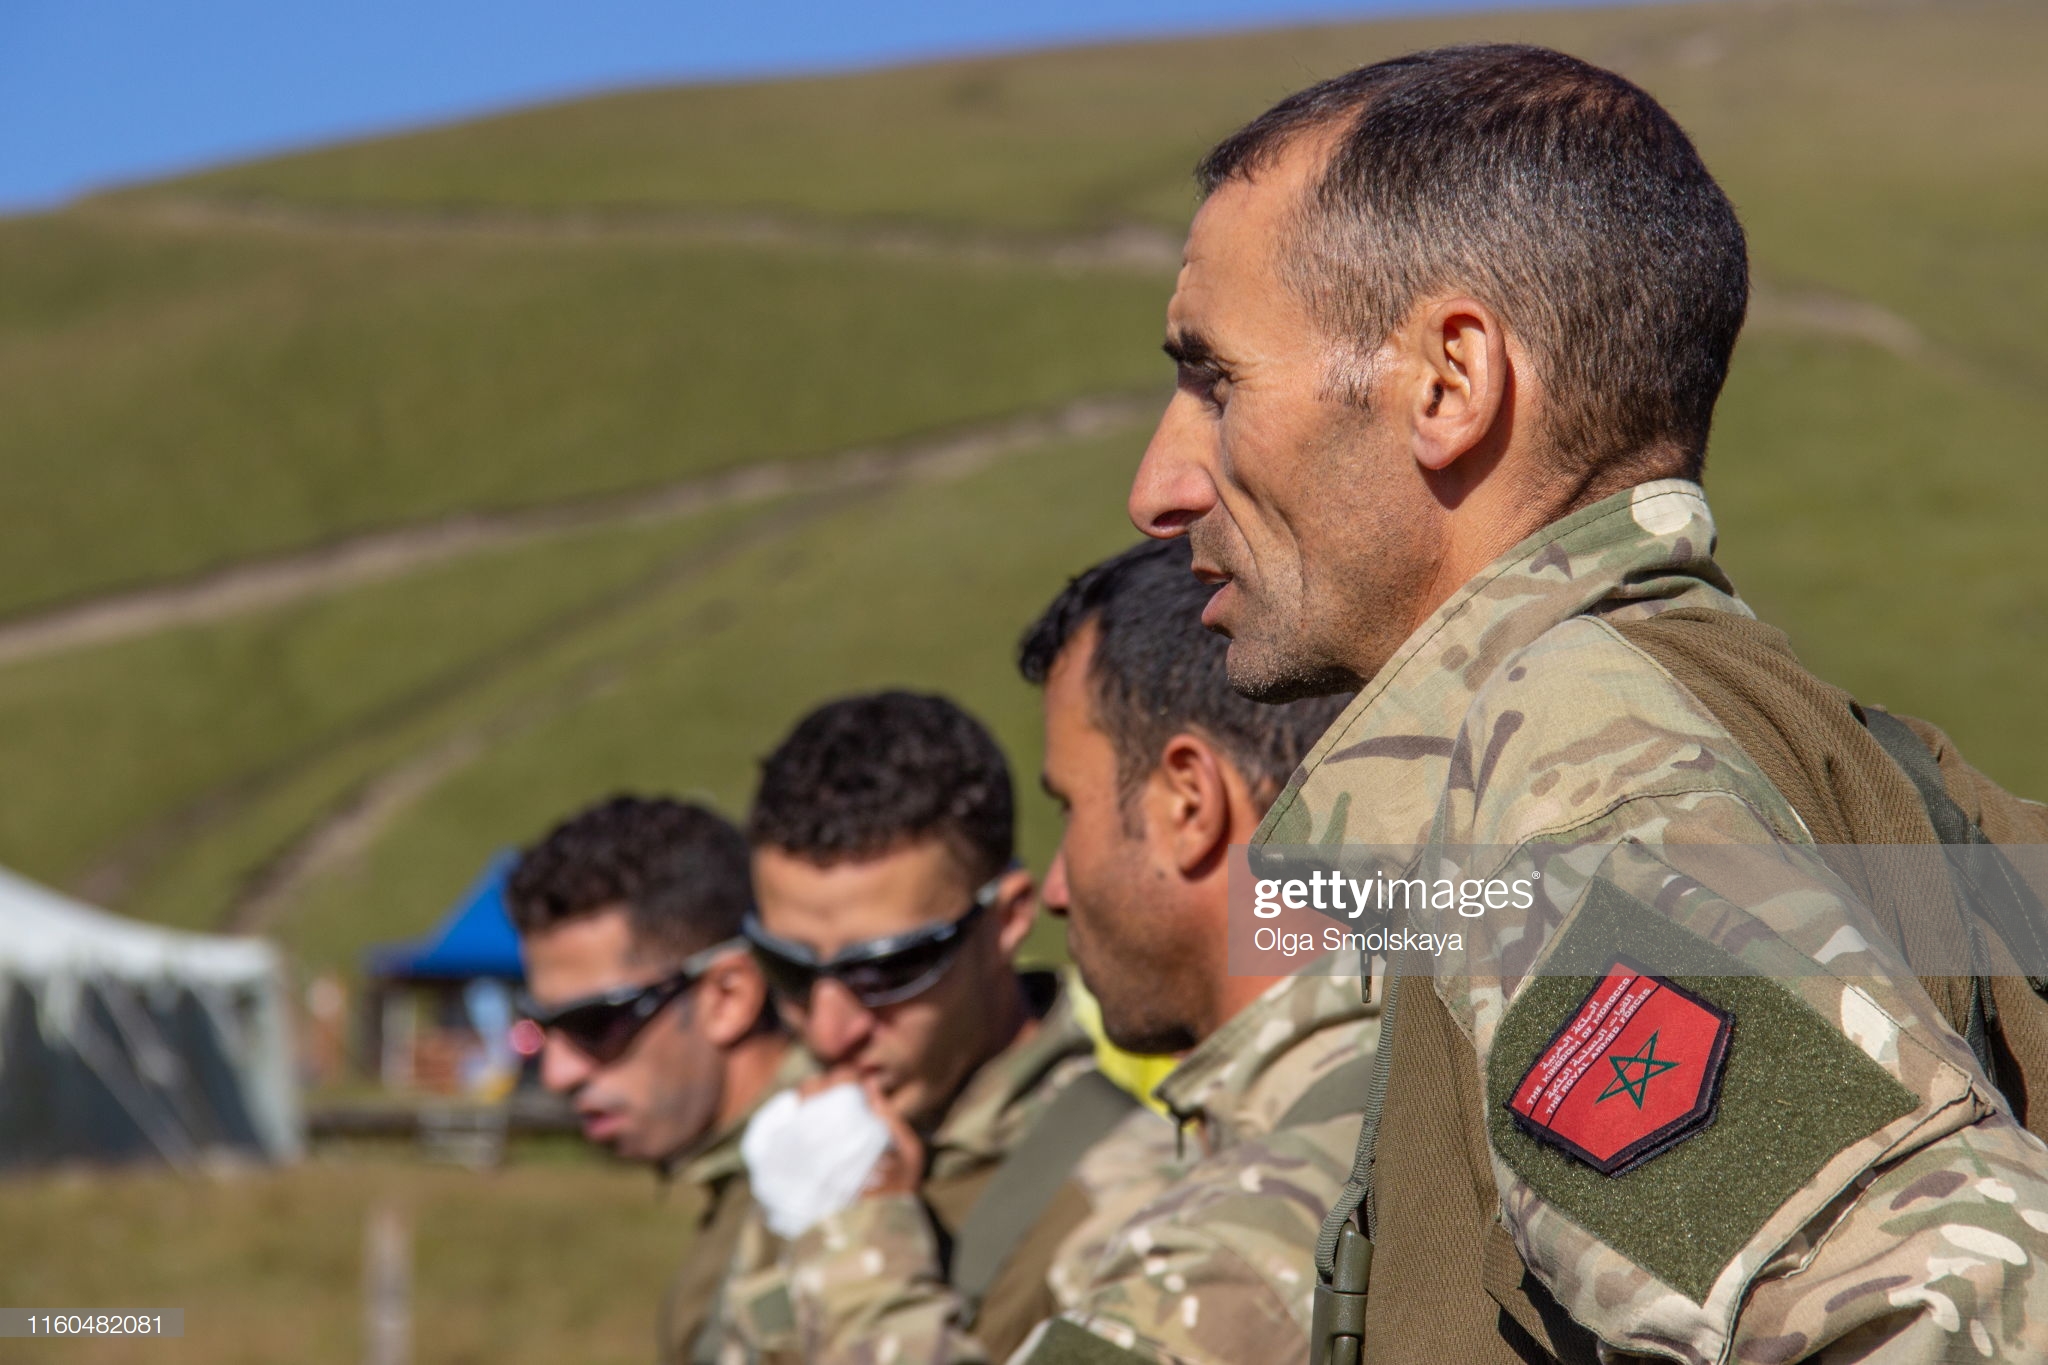 moroccan-royal-armed-forces-soldiers-take-part-in-a-competition-an-picture-id1160482081